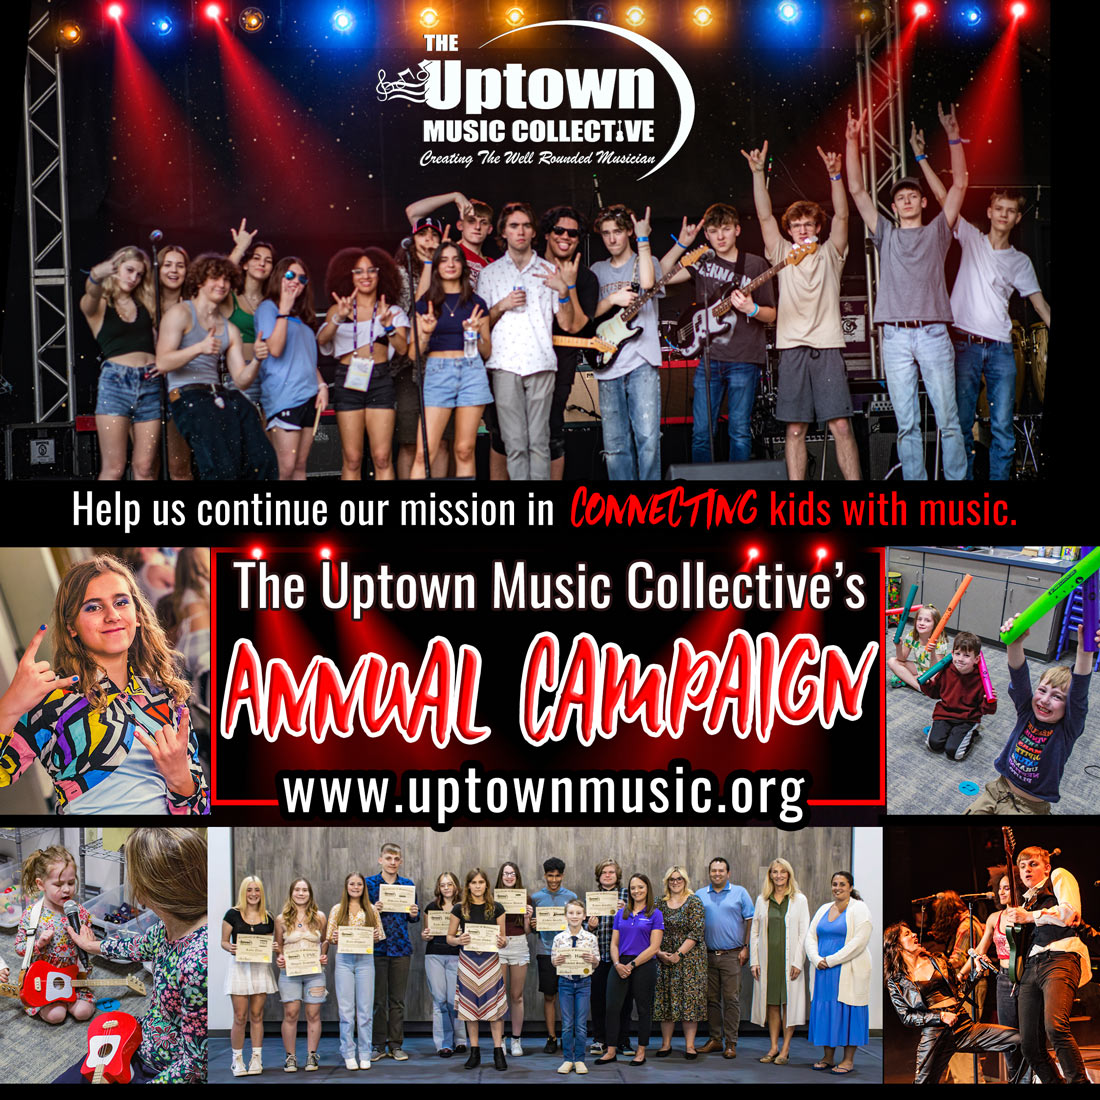 The Uptown Music Collective's Annual Campaign for 2023-2024.